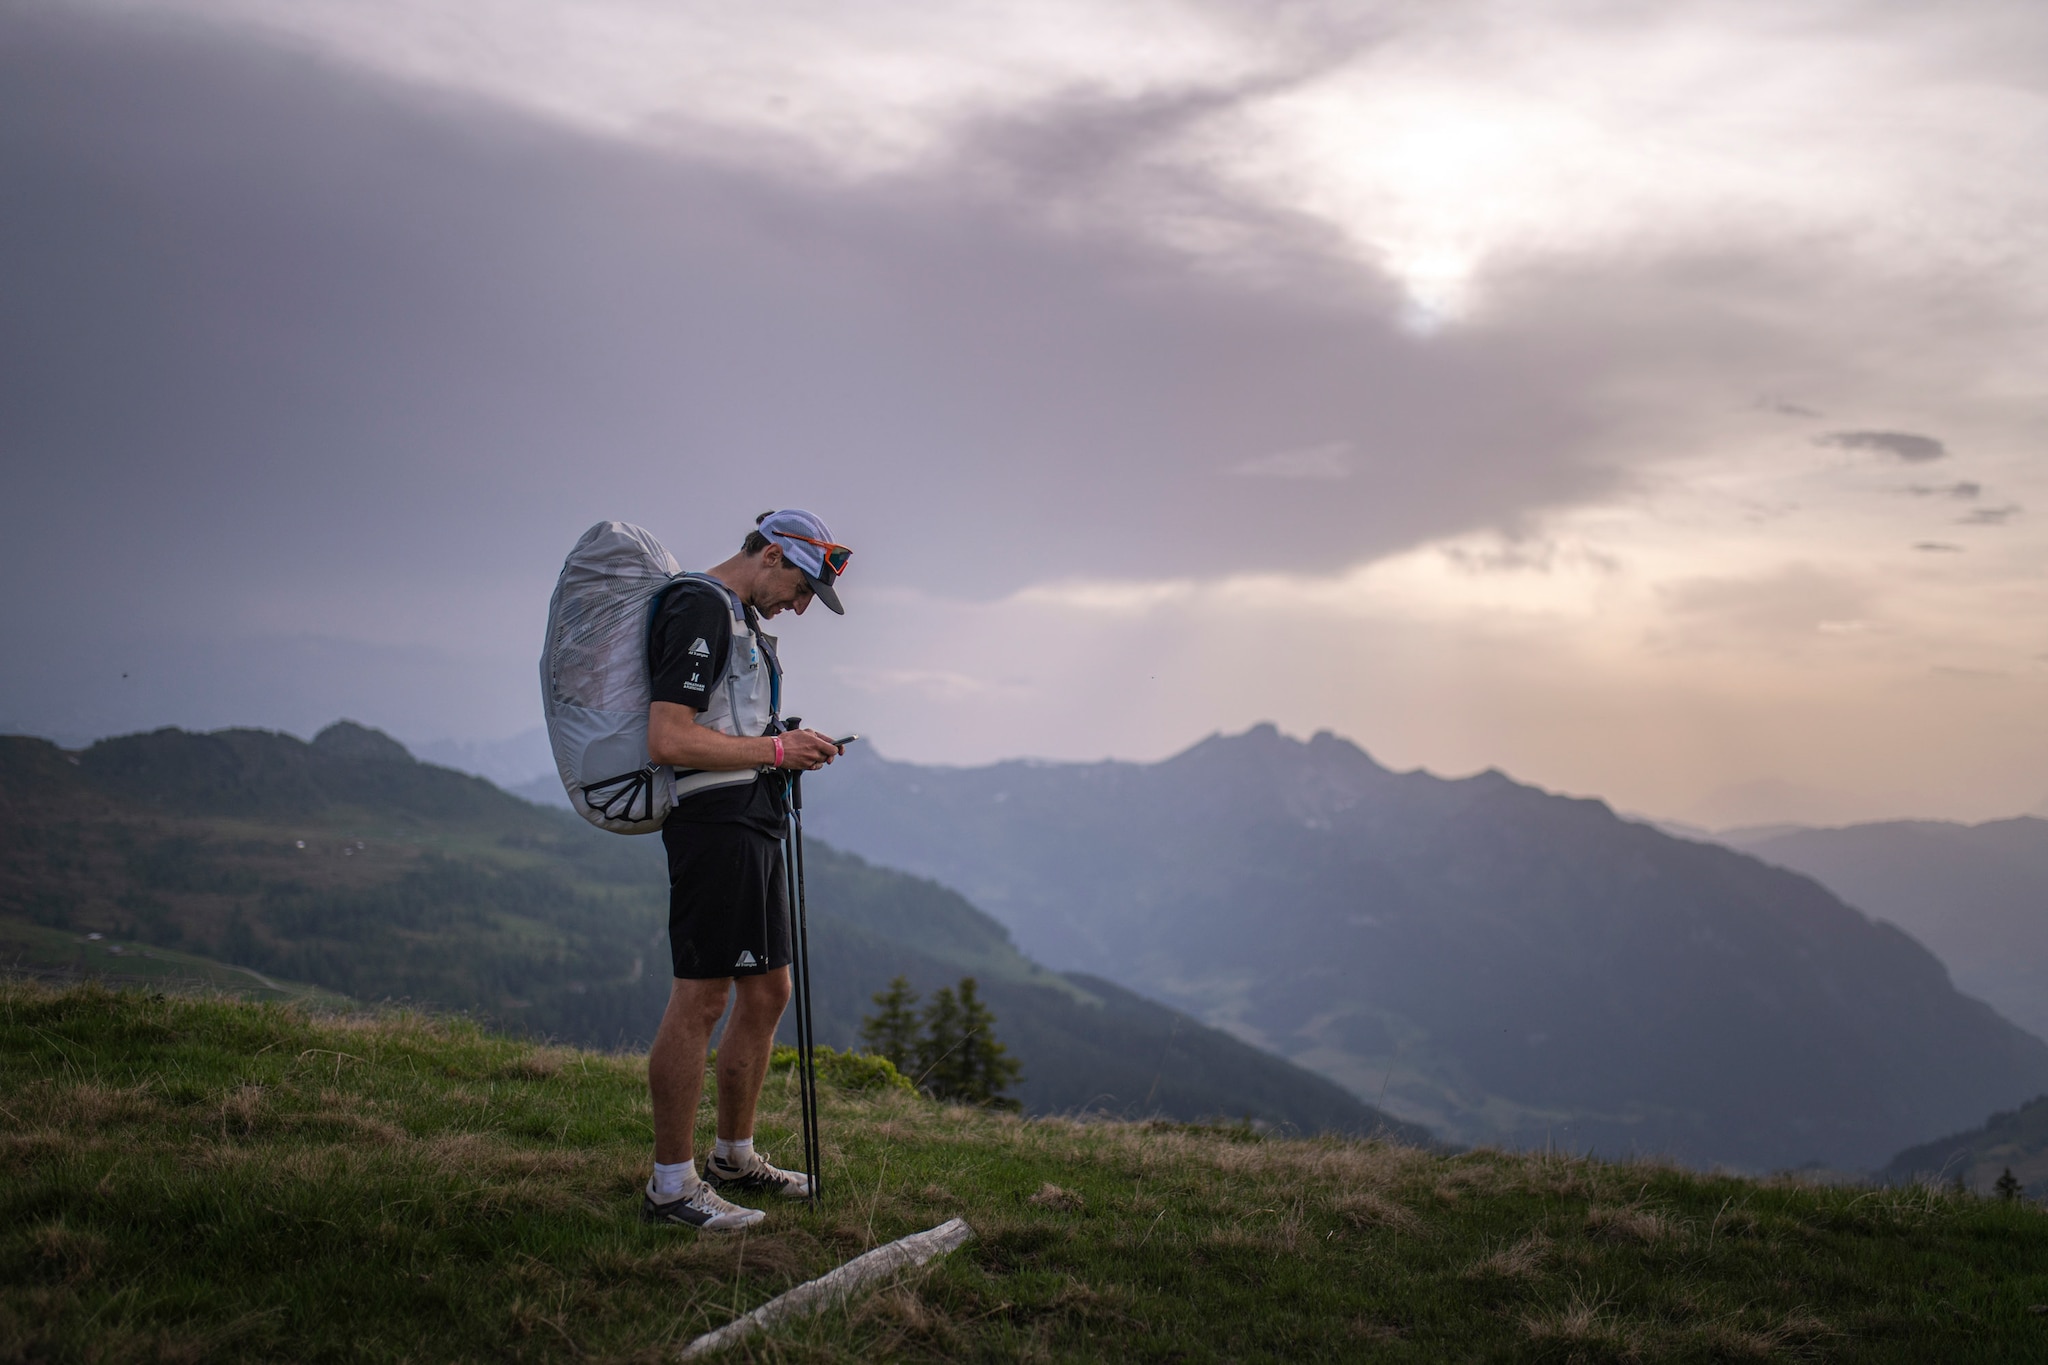 Maxime Pinot (FRA1) seen above turnpoint Wagrain-Kleinarl prior to the Red Bull X-Alps in Salzburg on June 20, 2021.